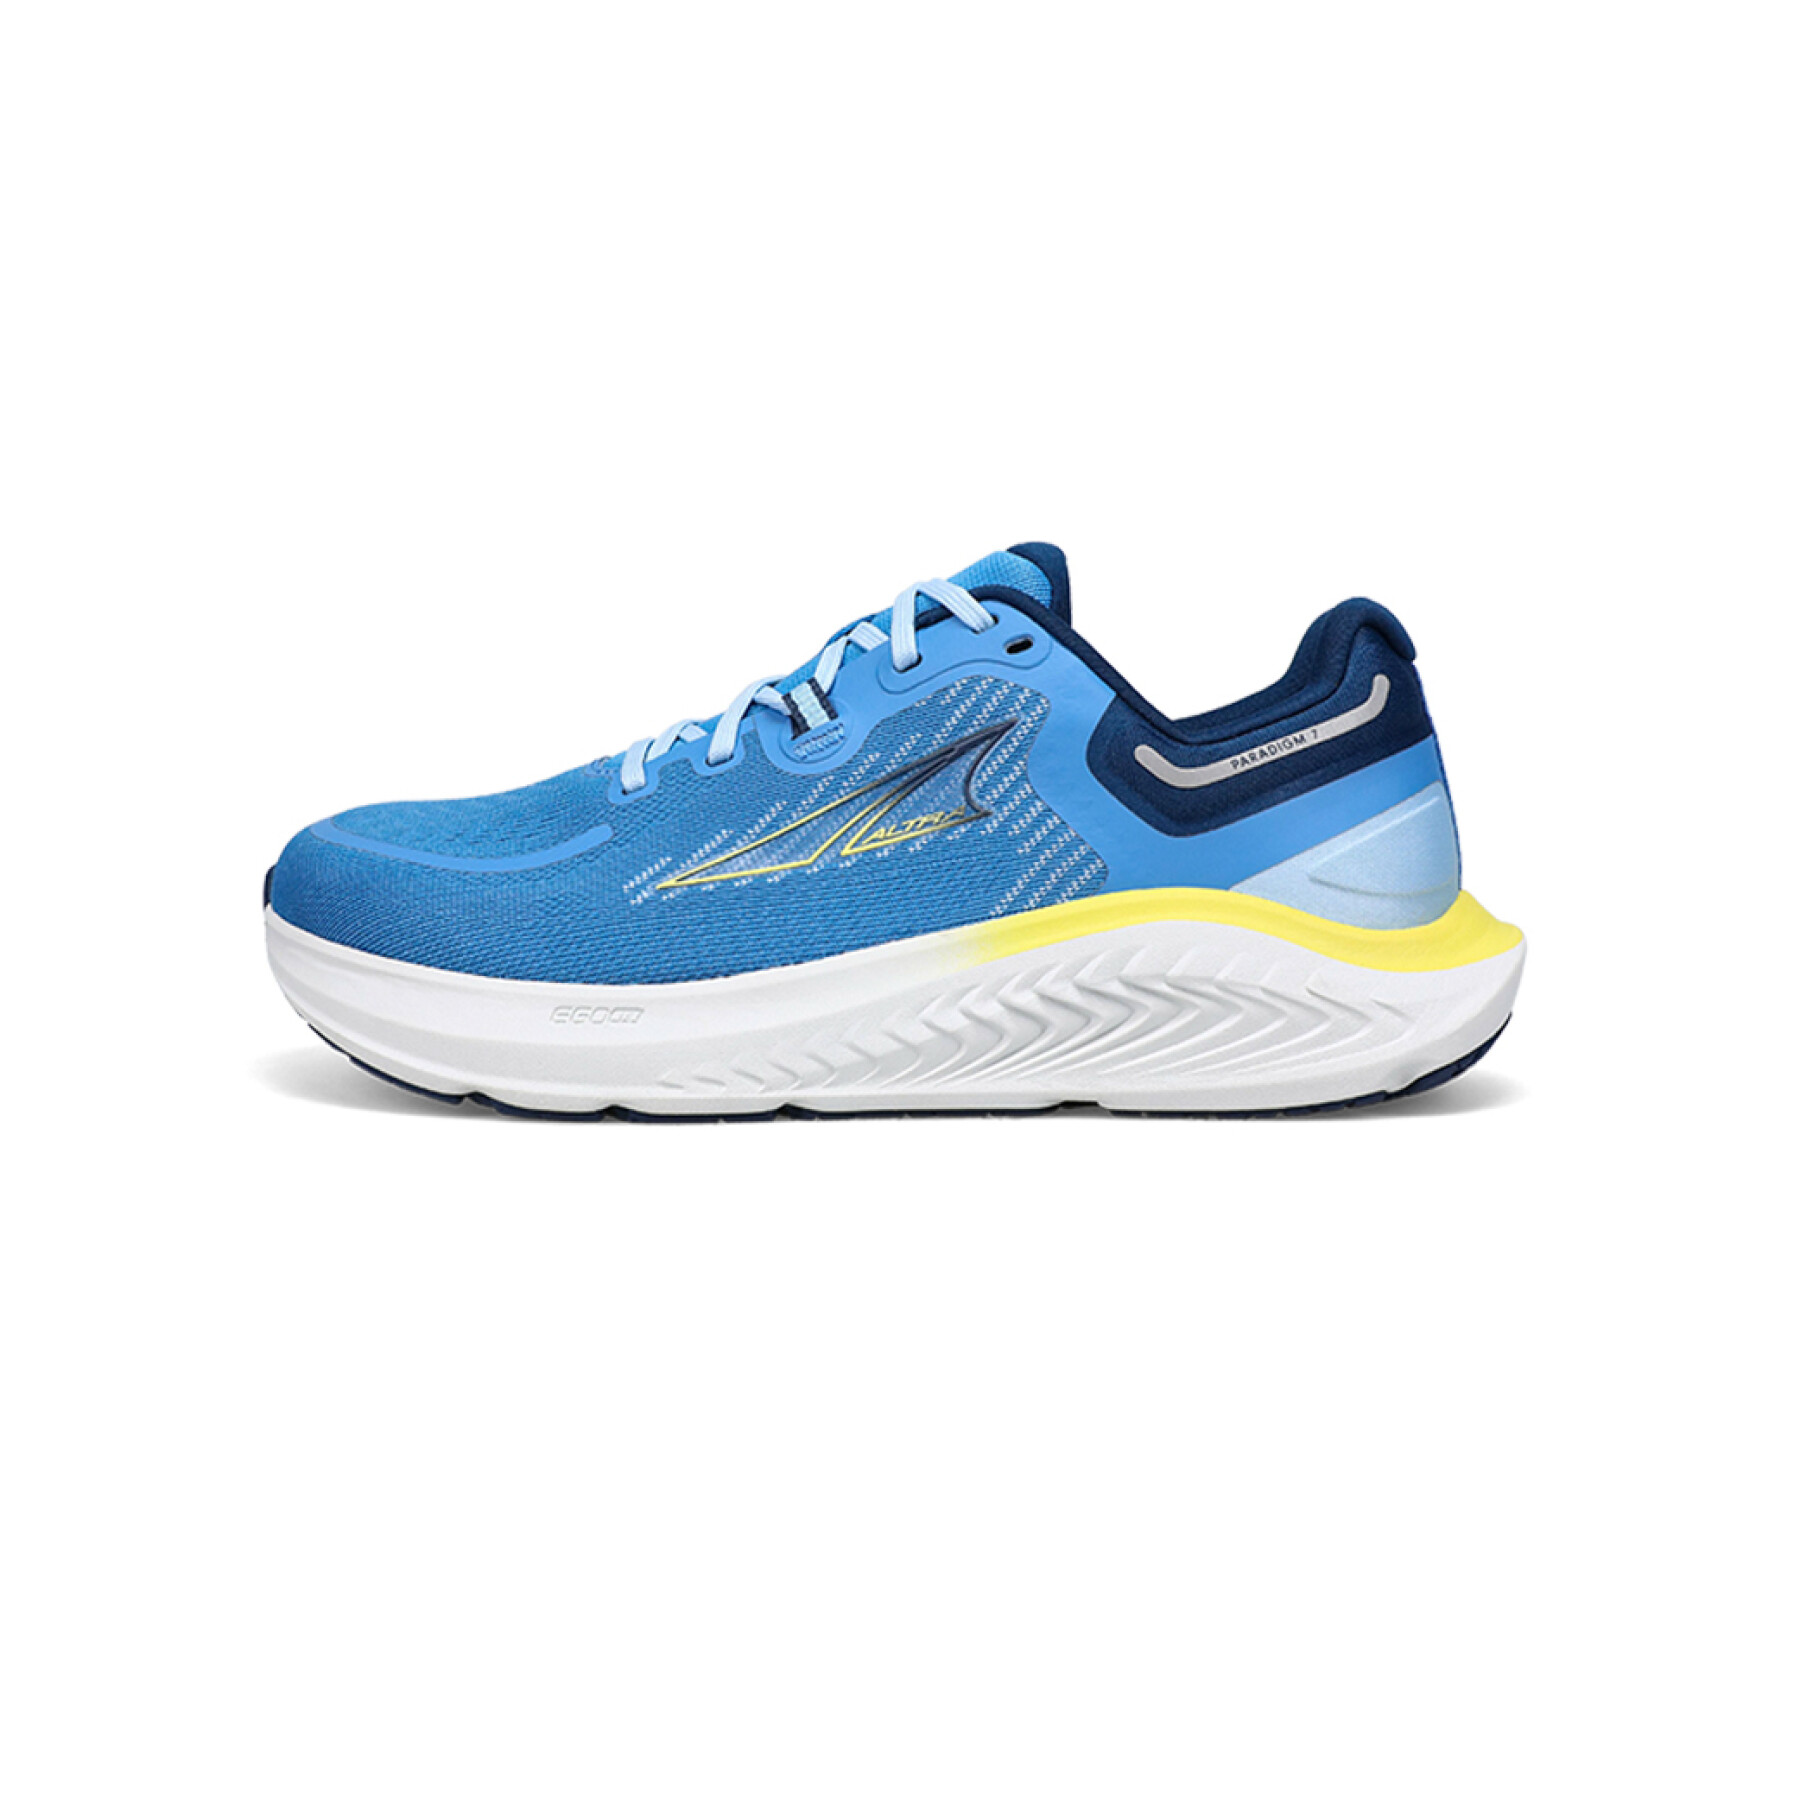 Women's running shoes Altra Paradigm 7 Wide